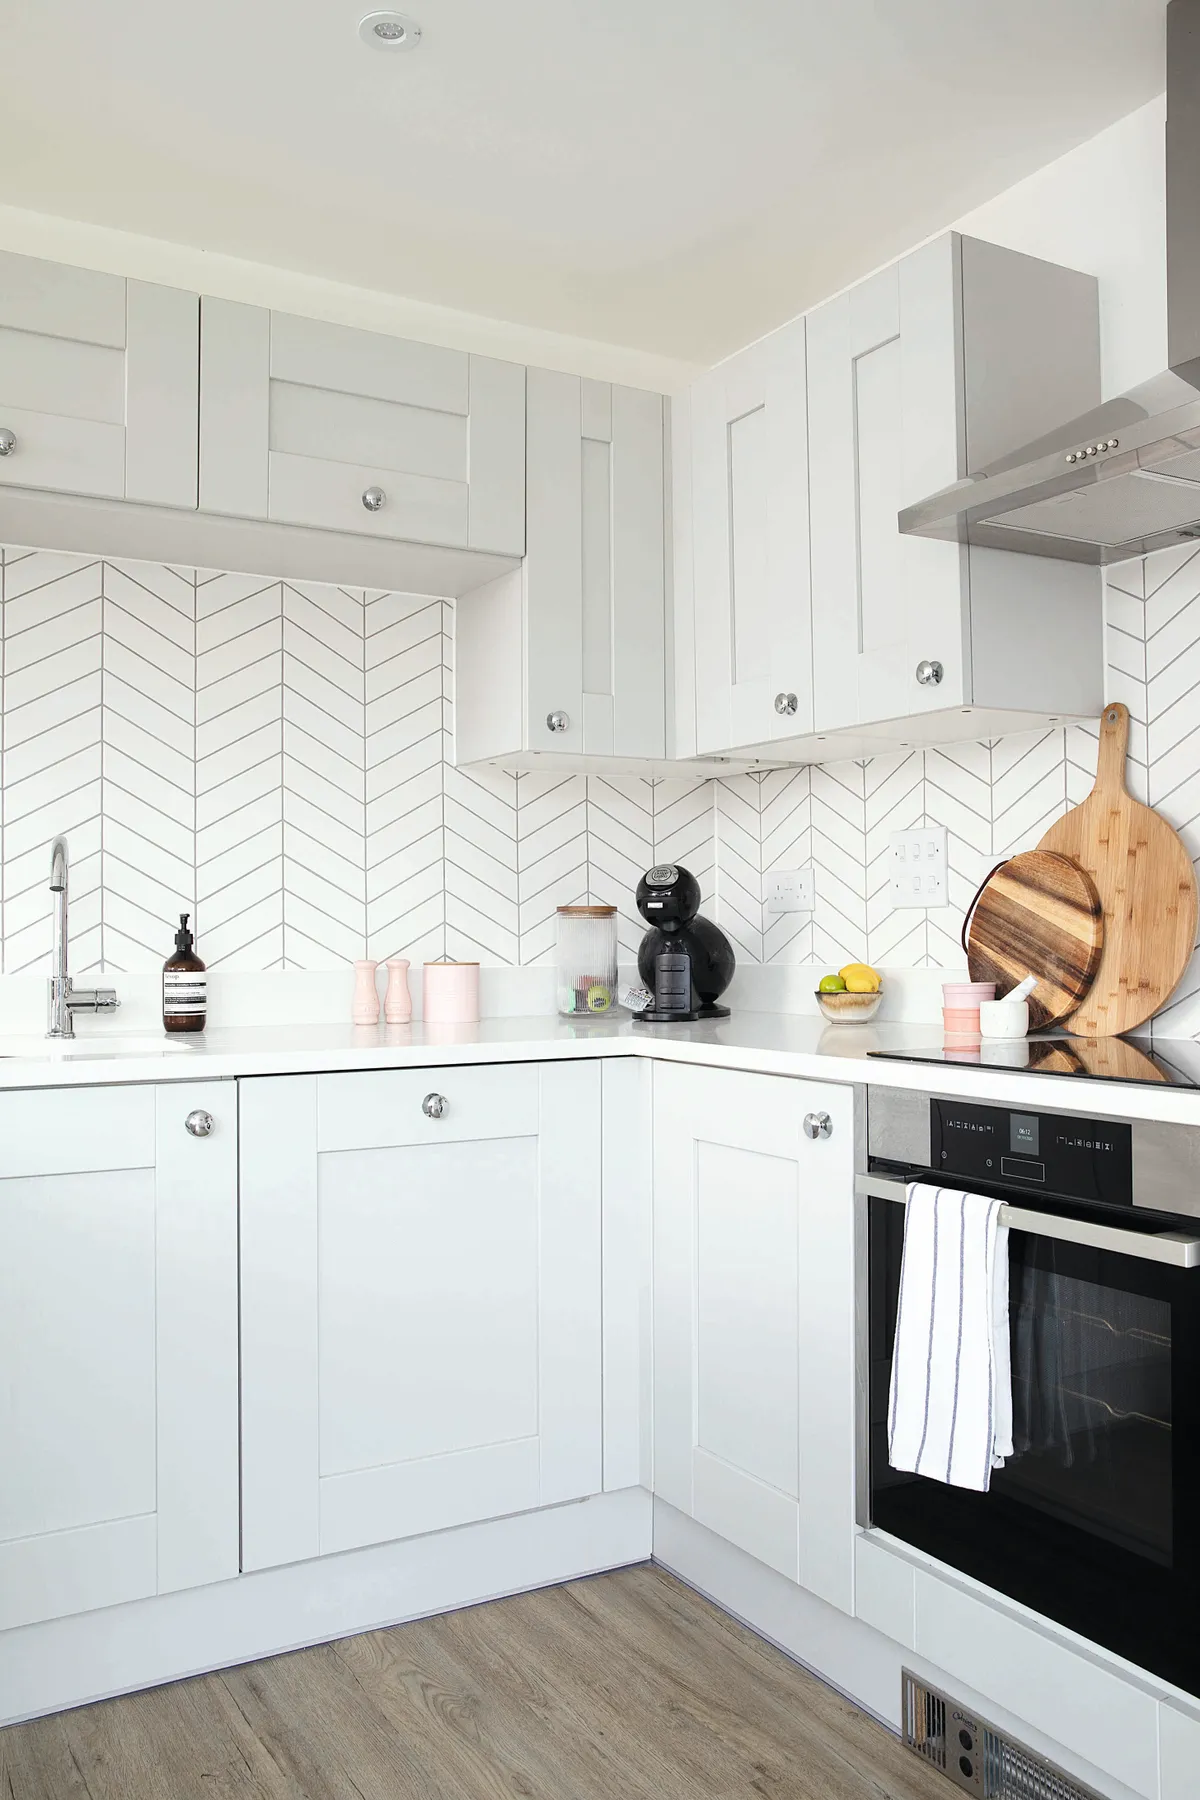 ‘We added the chevron wall tiles from Porcelain Superstore and new cupboard handles after we moved in. Previously the splashback area was just painted, with a chrome panel behind the hob, so this has really finished it off’